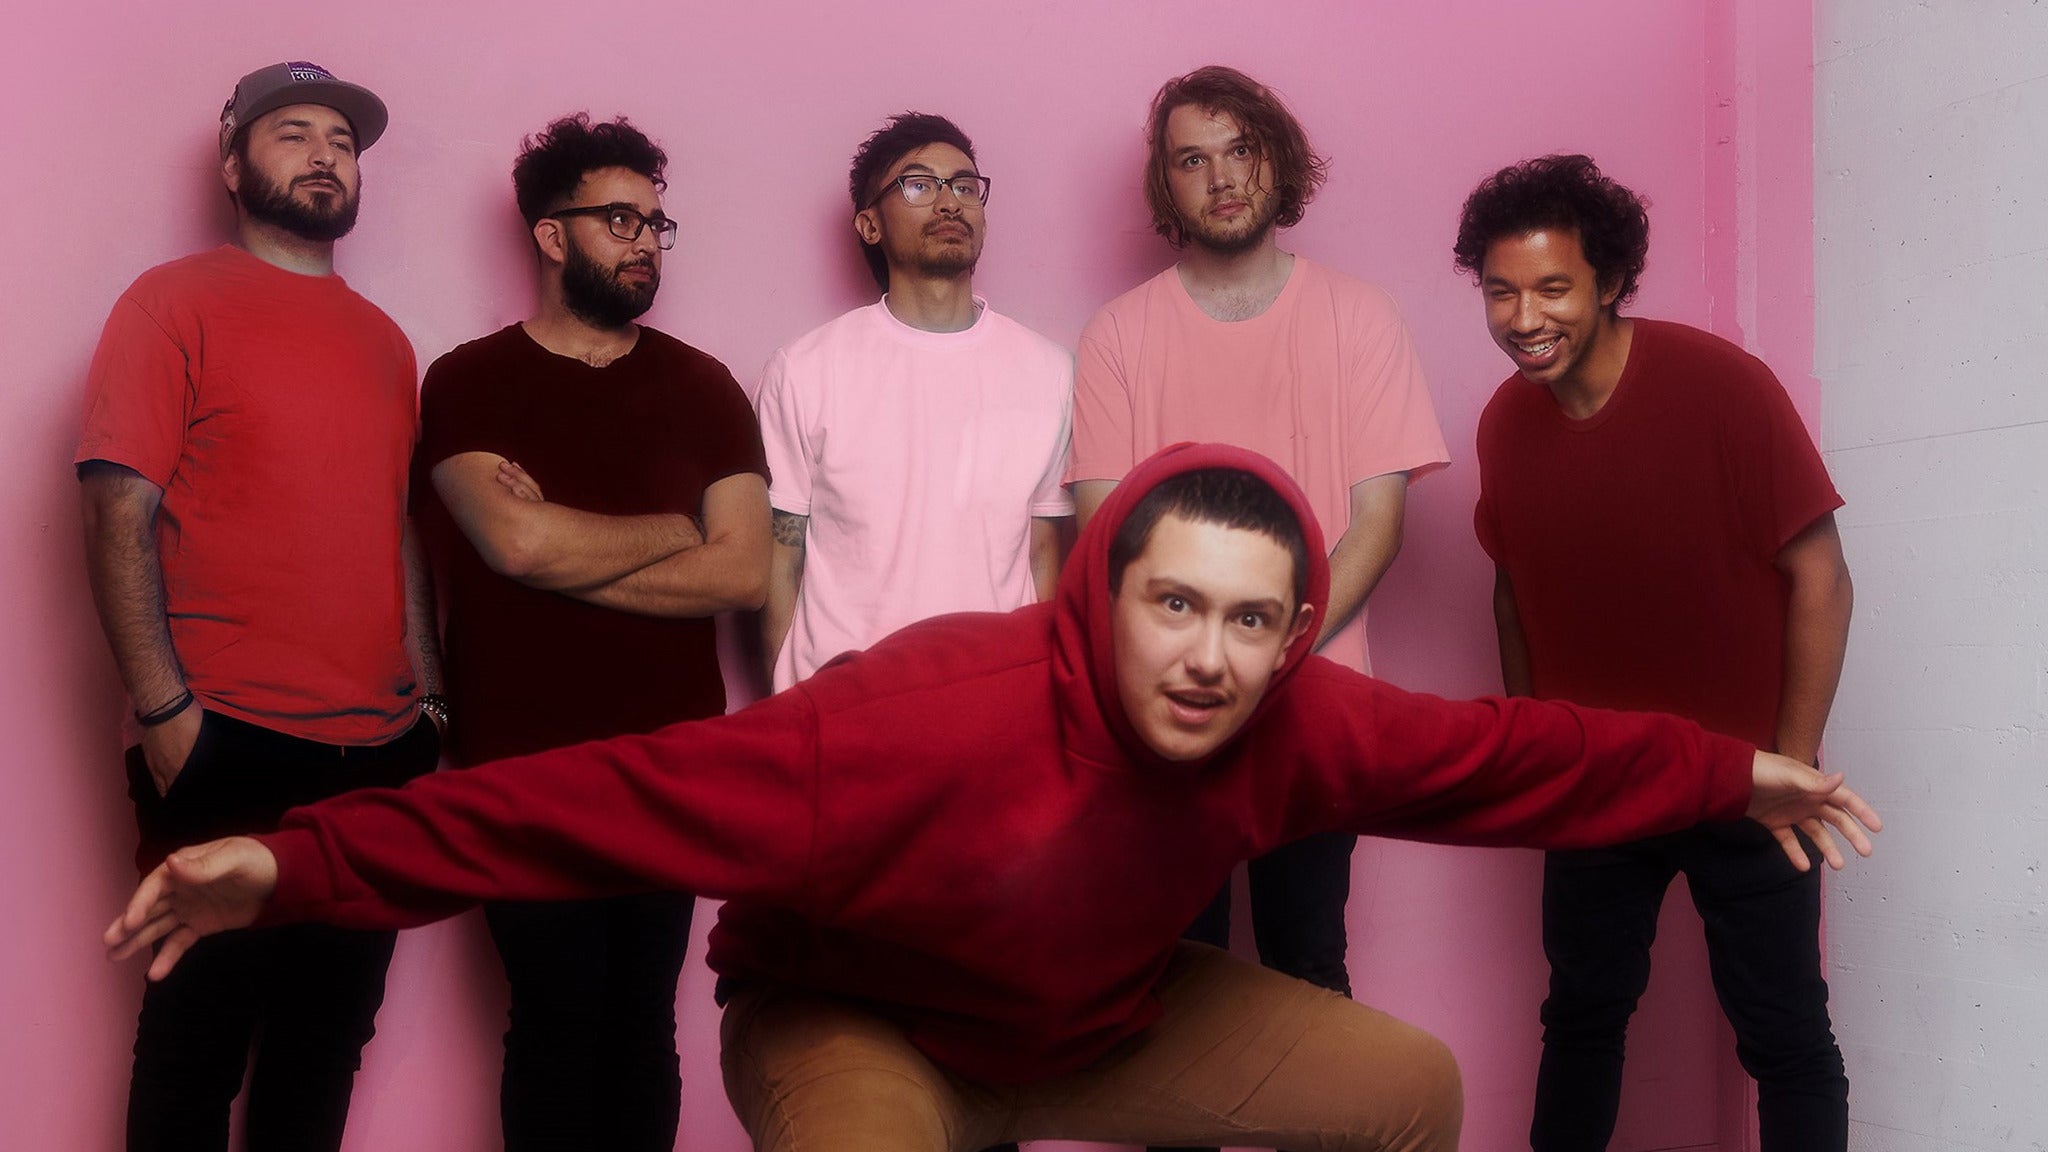 The Fall Tour of Hobo Johnson & the Lovemakers in Dallas event information